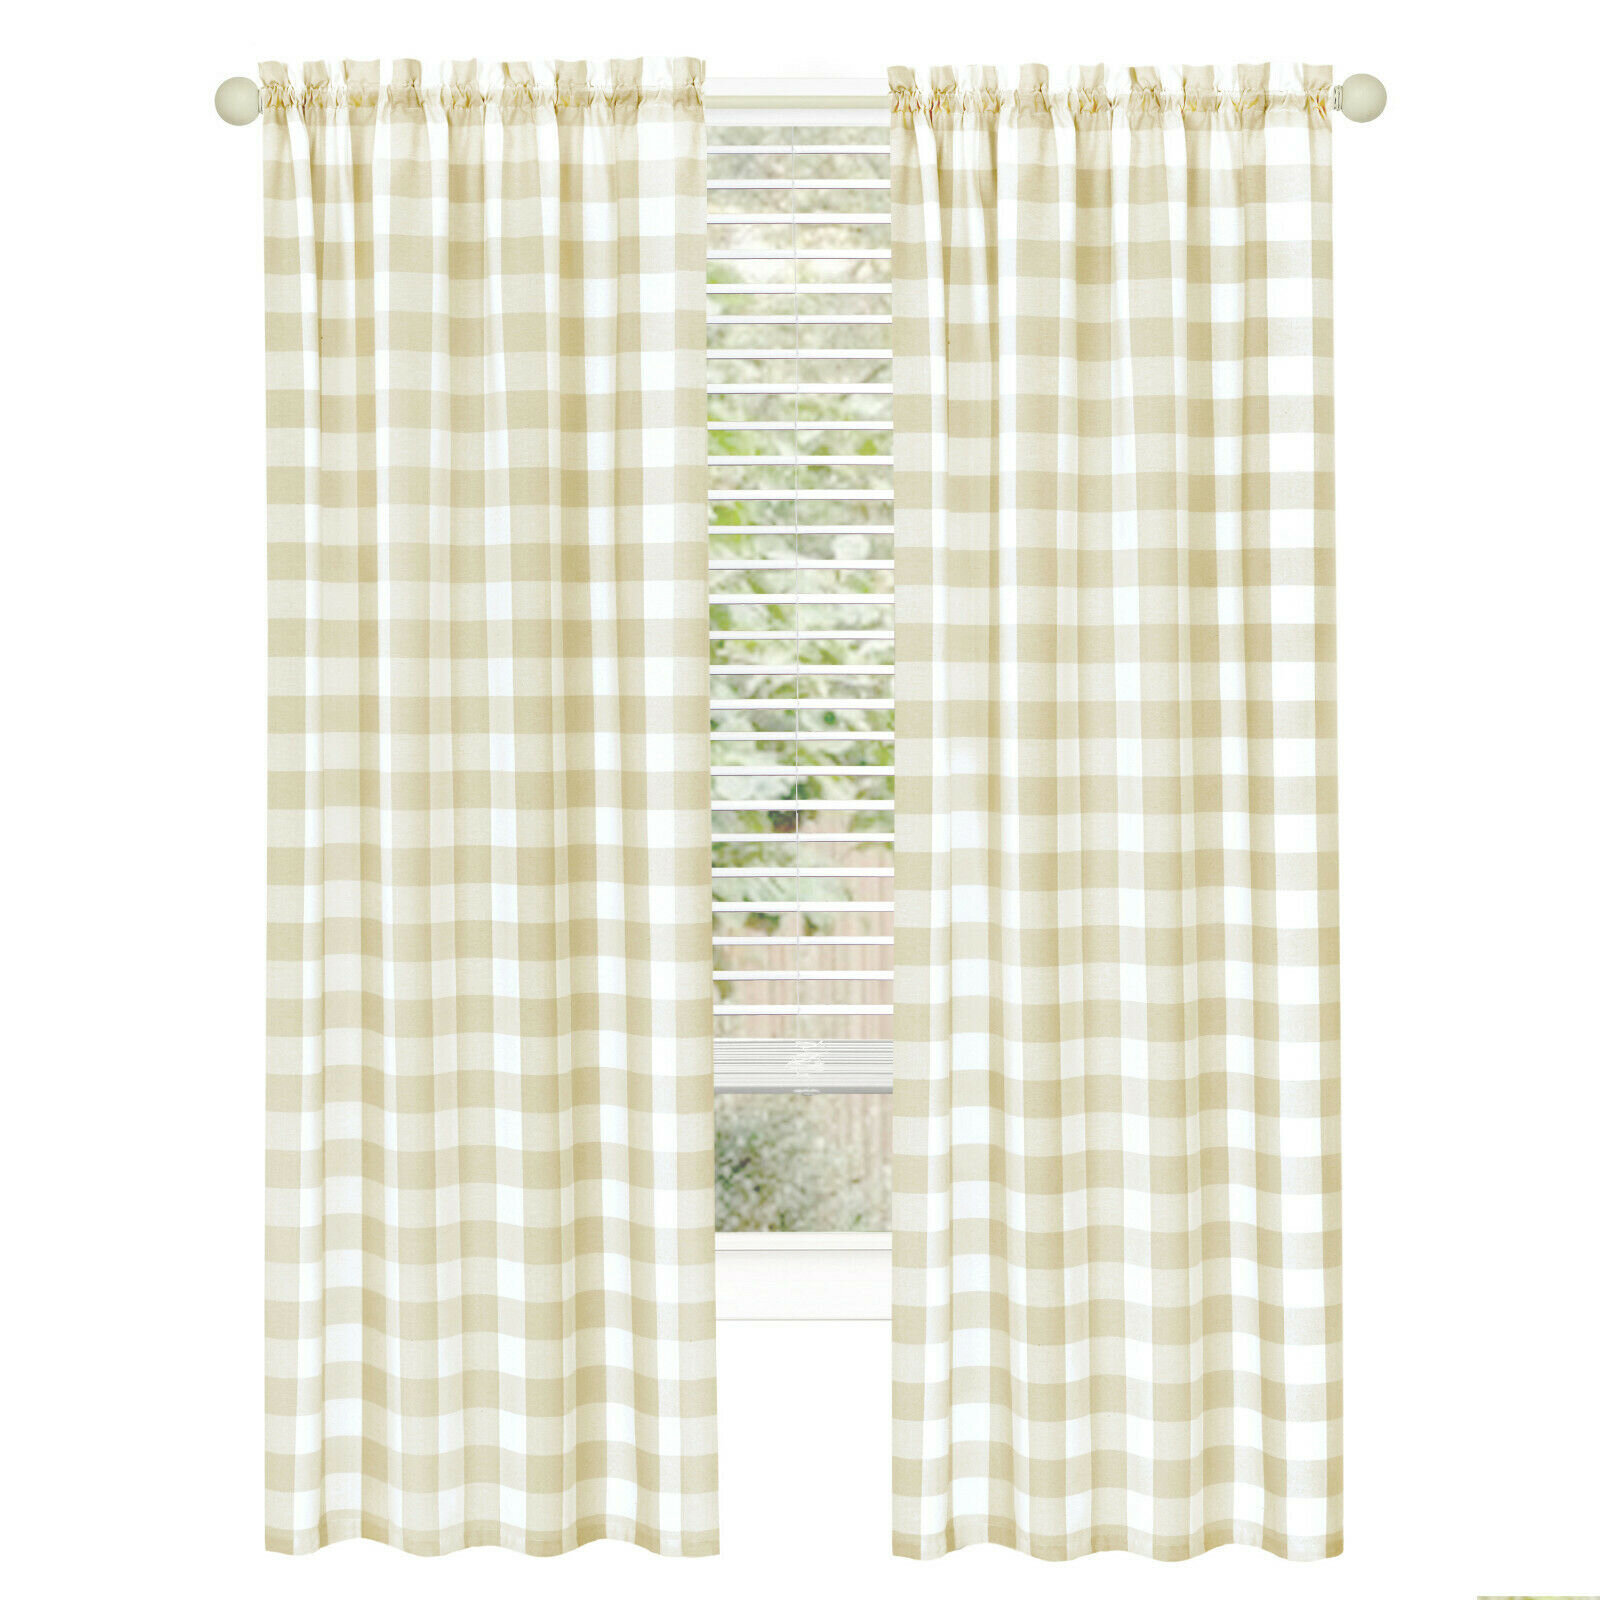 Kate Aurora Country Farmhouse Plaid Gingham Curtains Assorted Colors & Sizes 